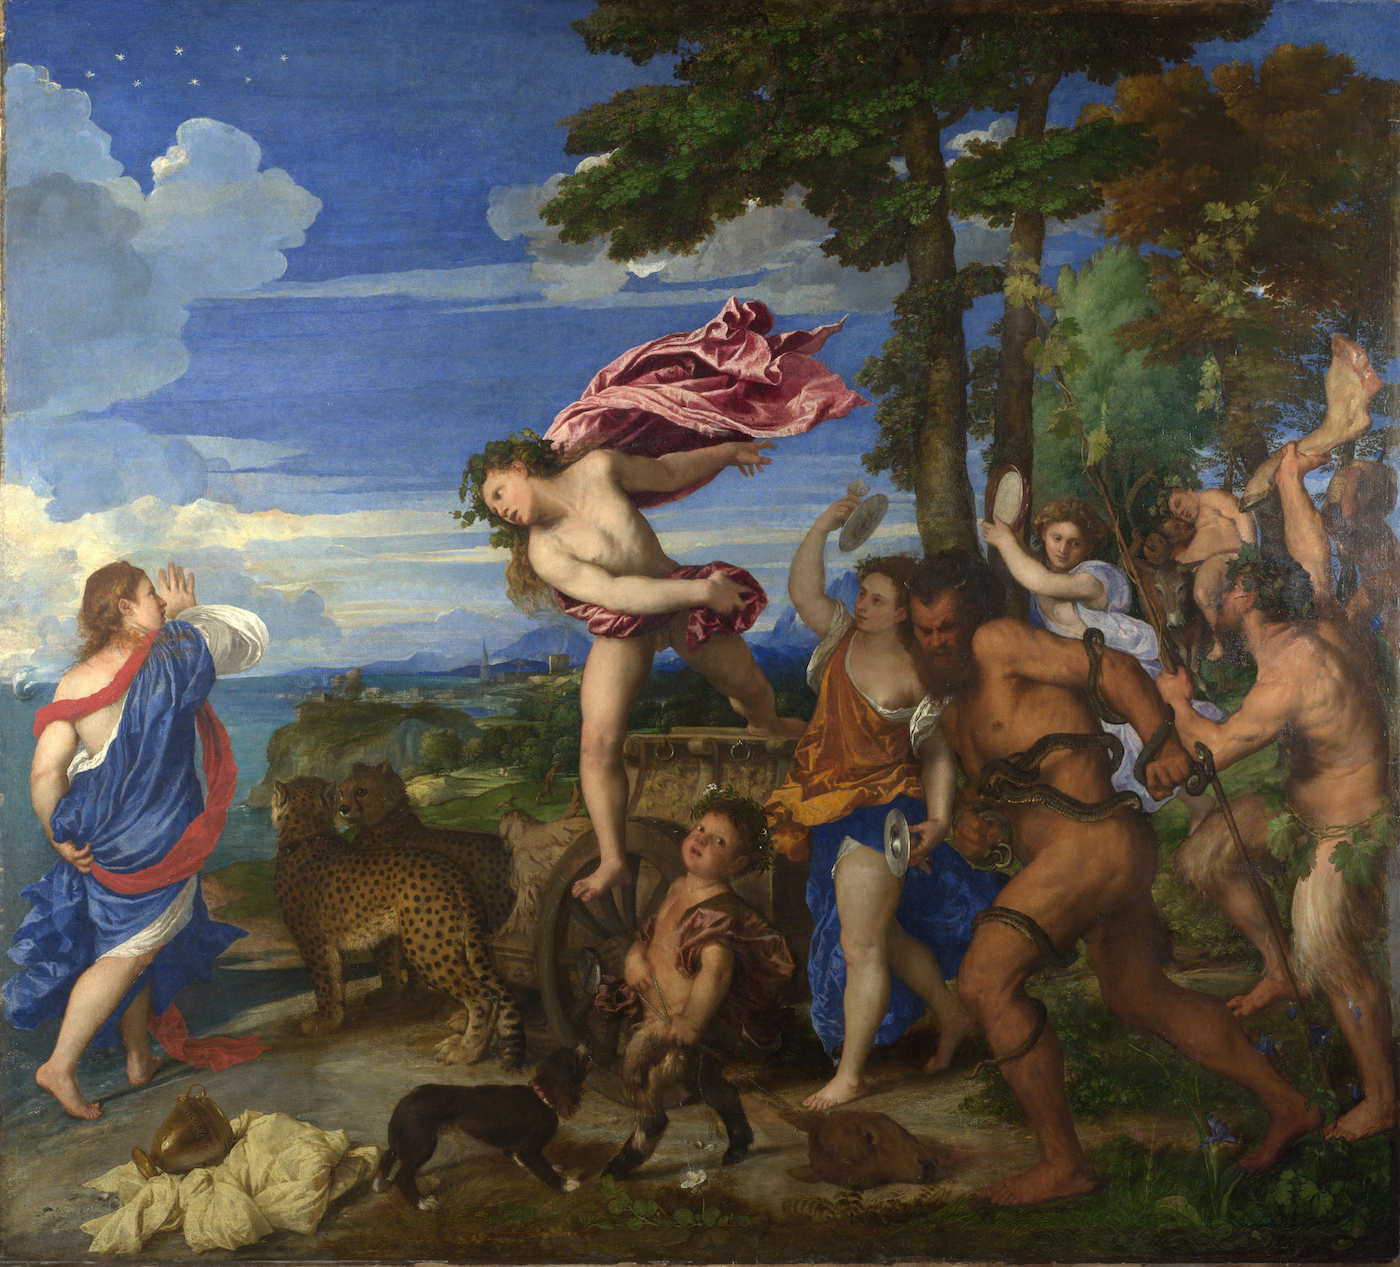 Titian, "Bacchus and Ariadne" (1520-23), oil on canvas. Lapis Lazuli was used in the sky and draped garments. 